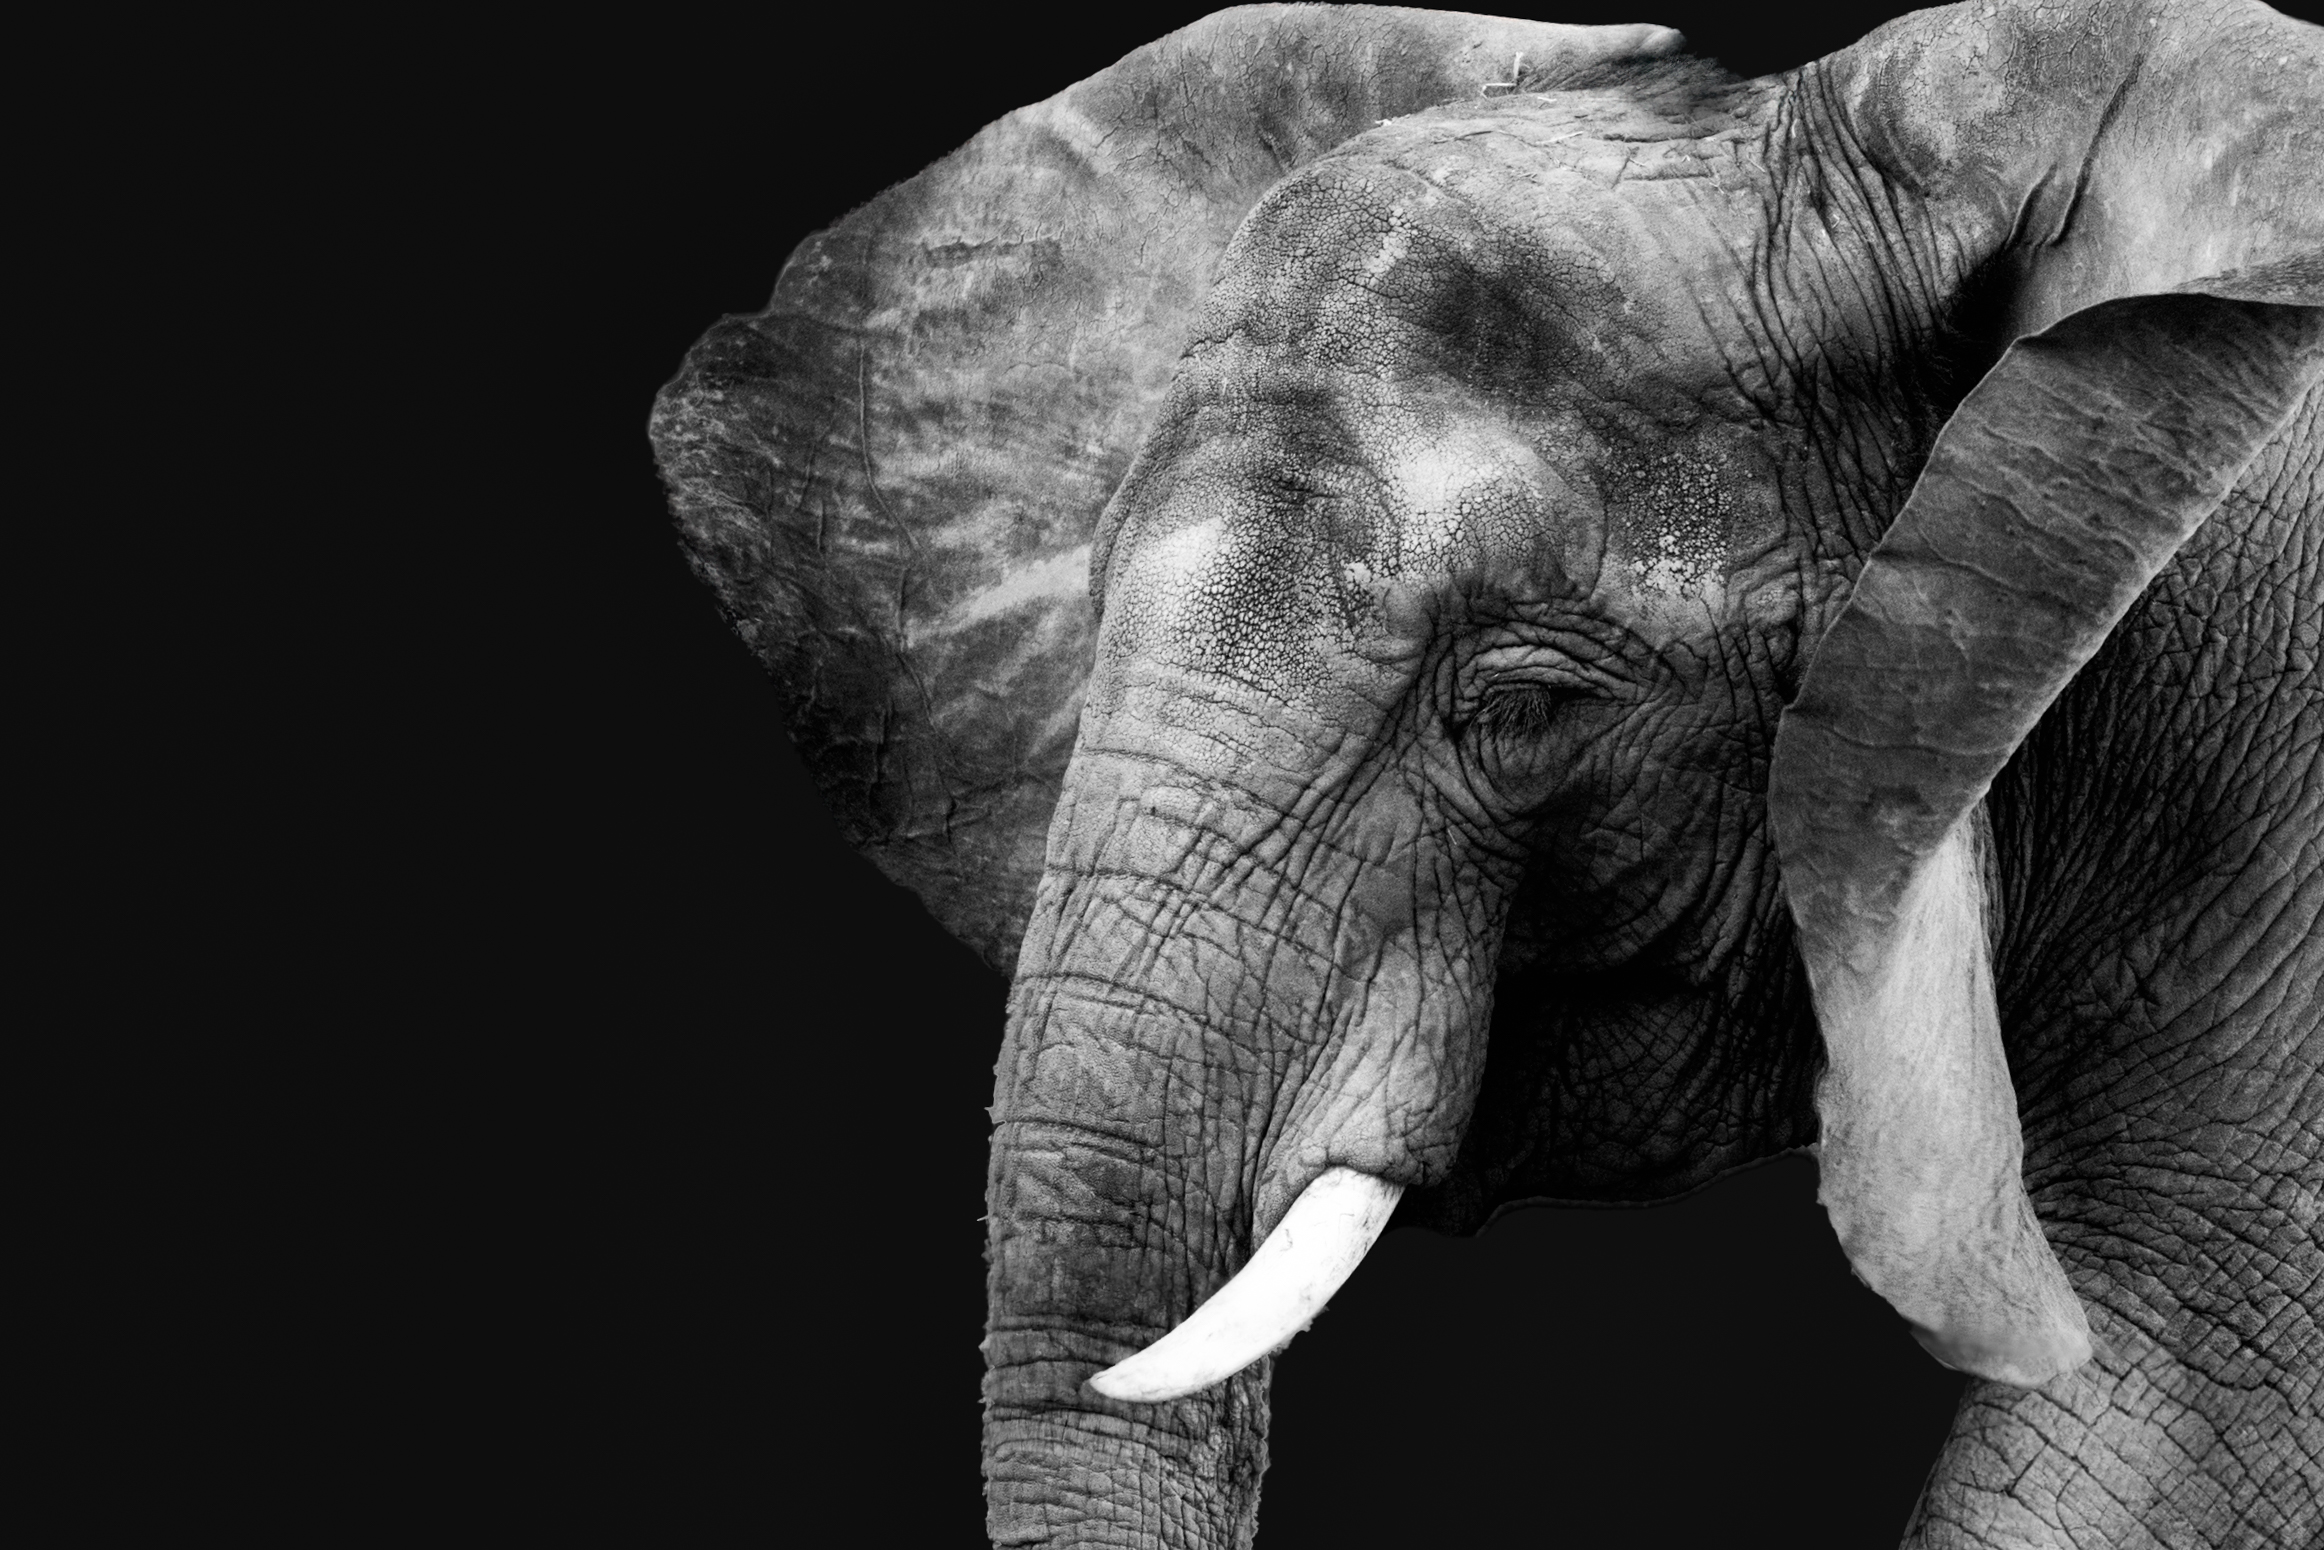 Black and White close up shot of an elephant.